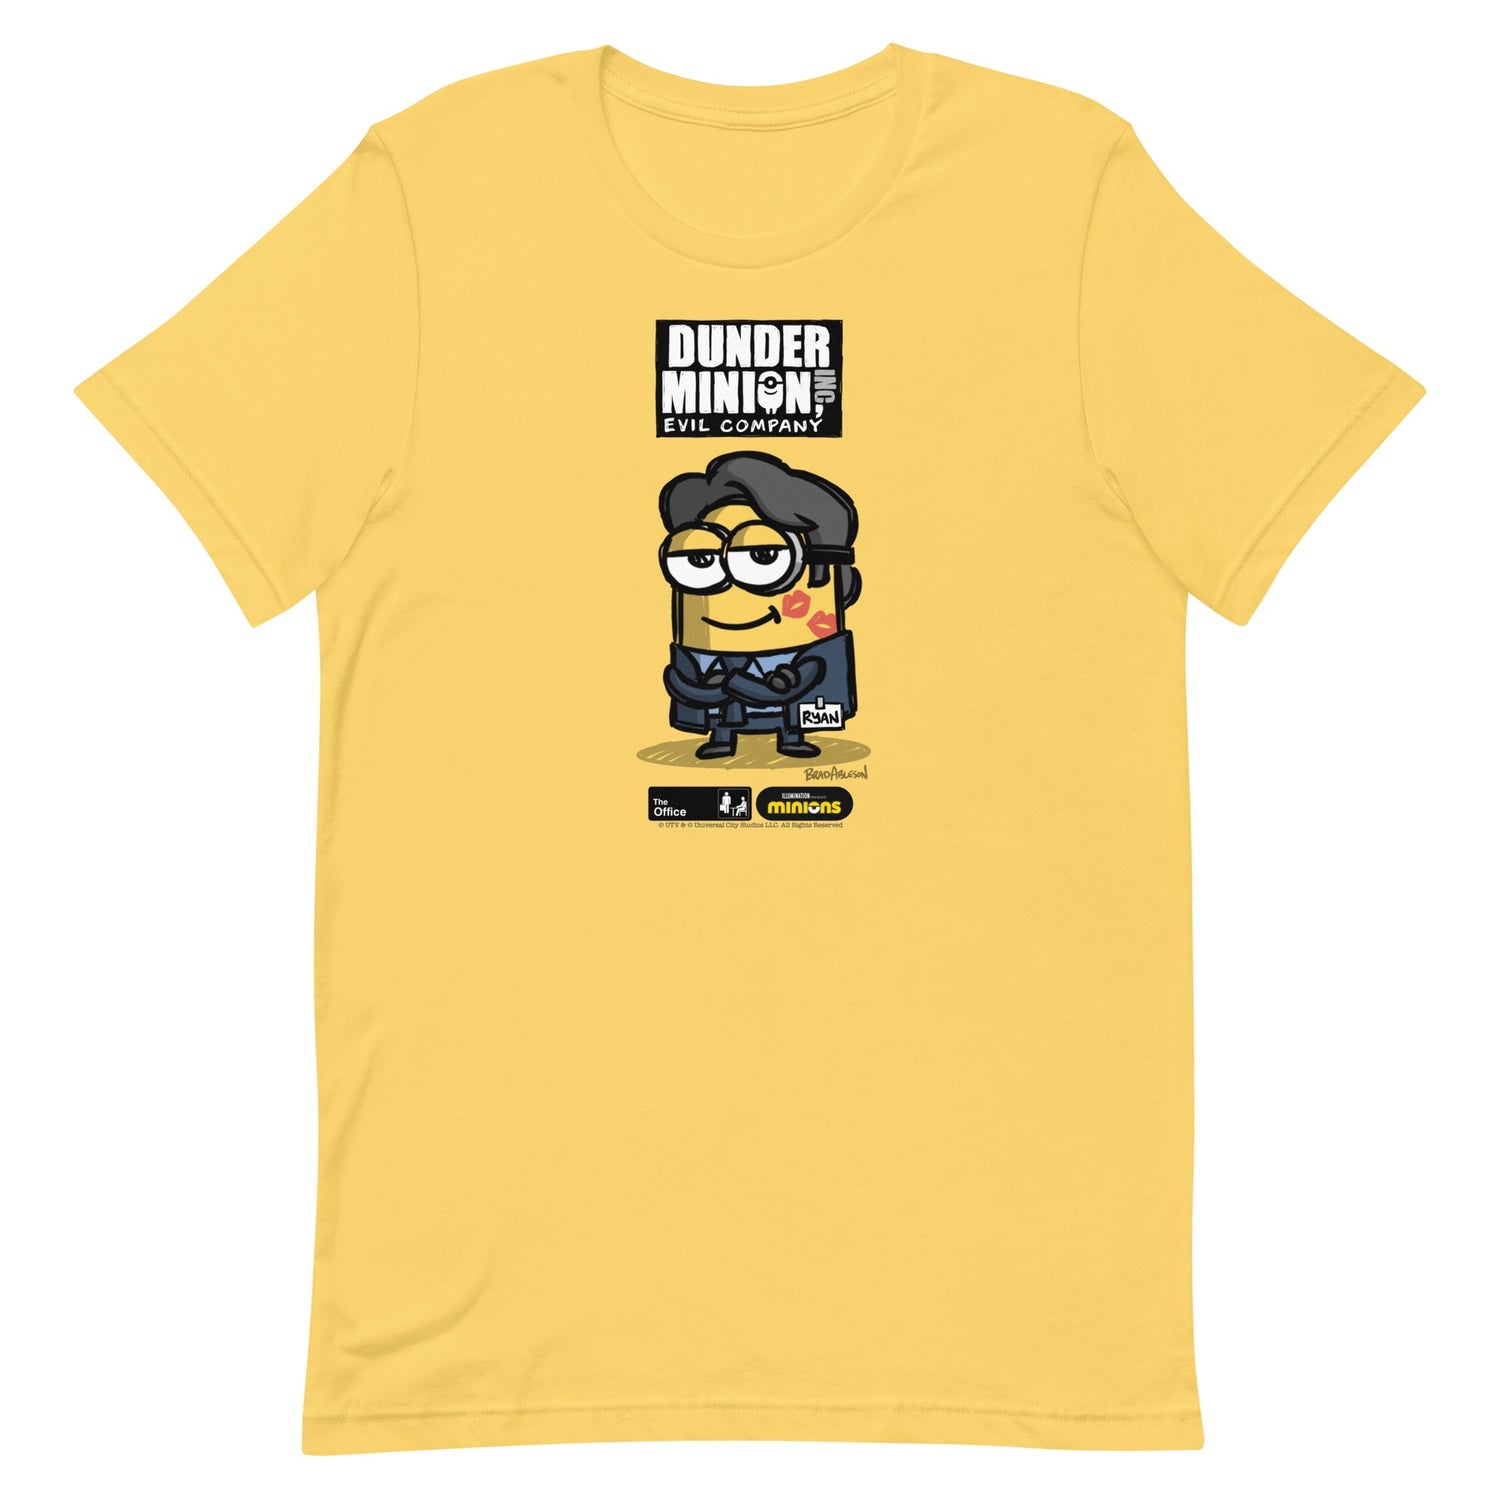 The T-Shirt Minions Store Character X – NBC Office